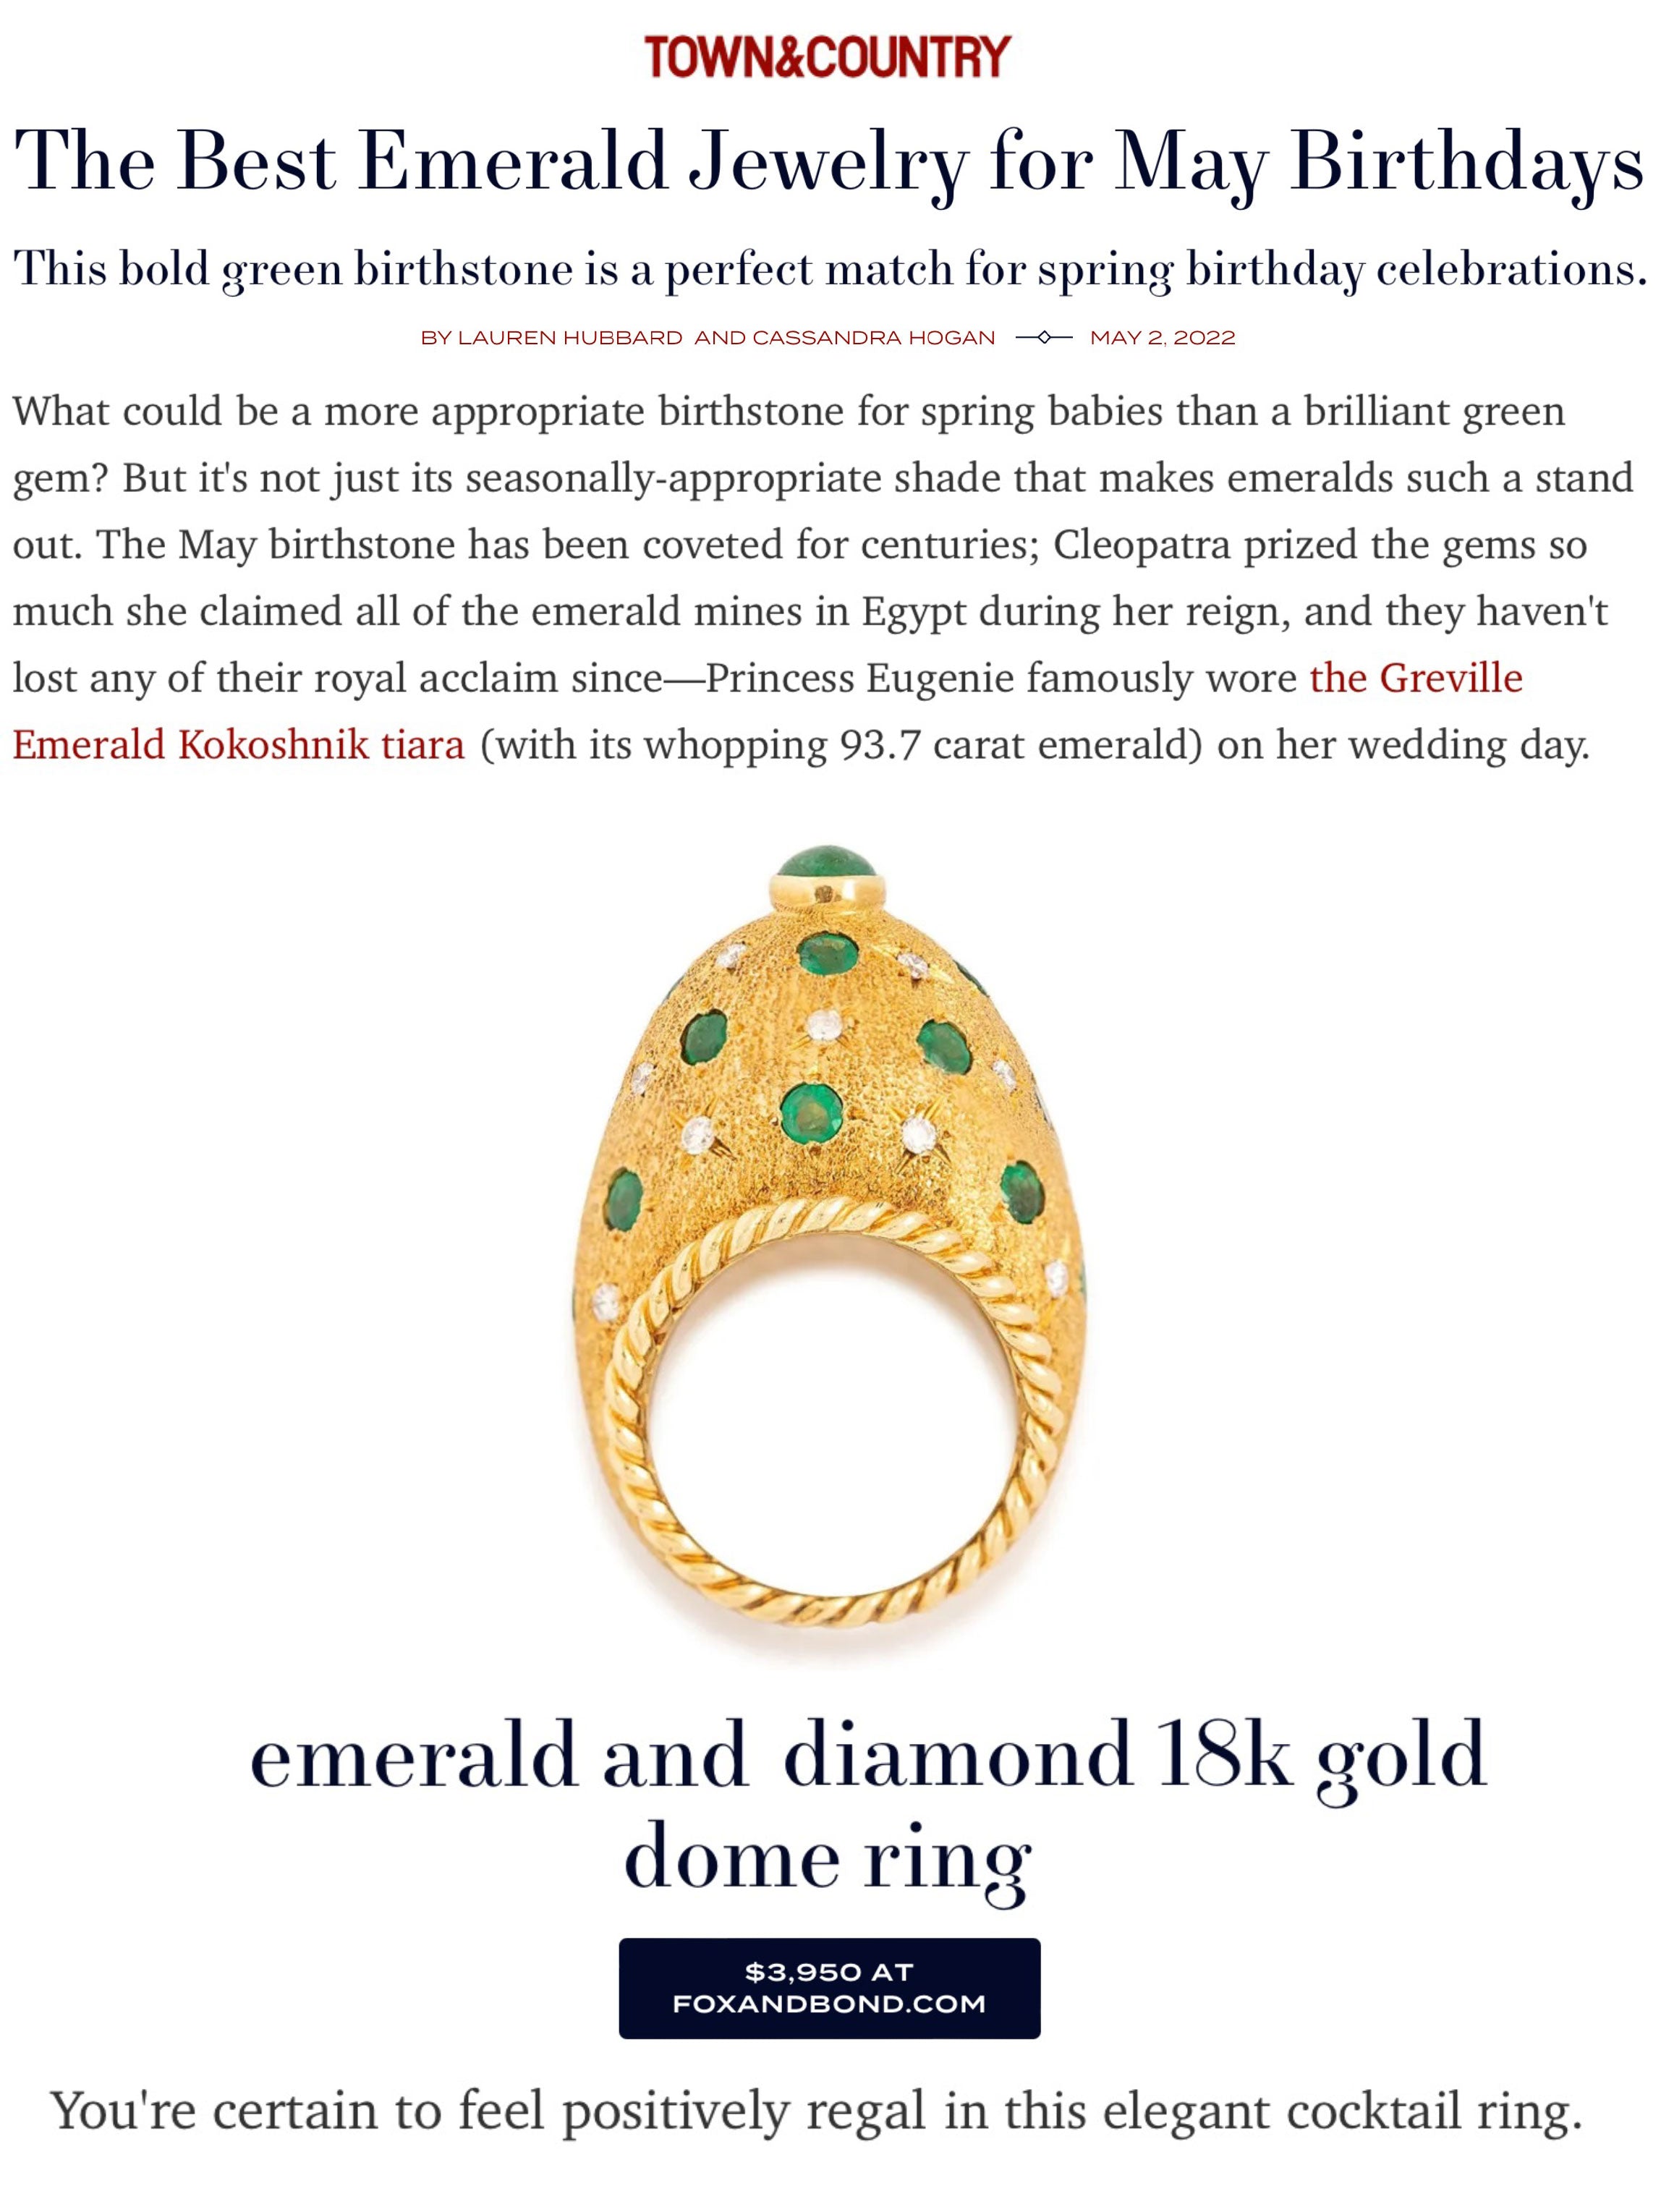 Town & Country: The Best Emerald Jewelry for May Birthdays